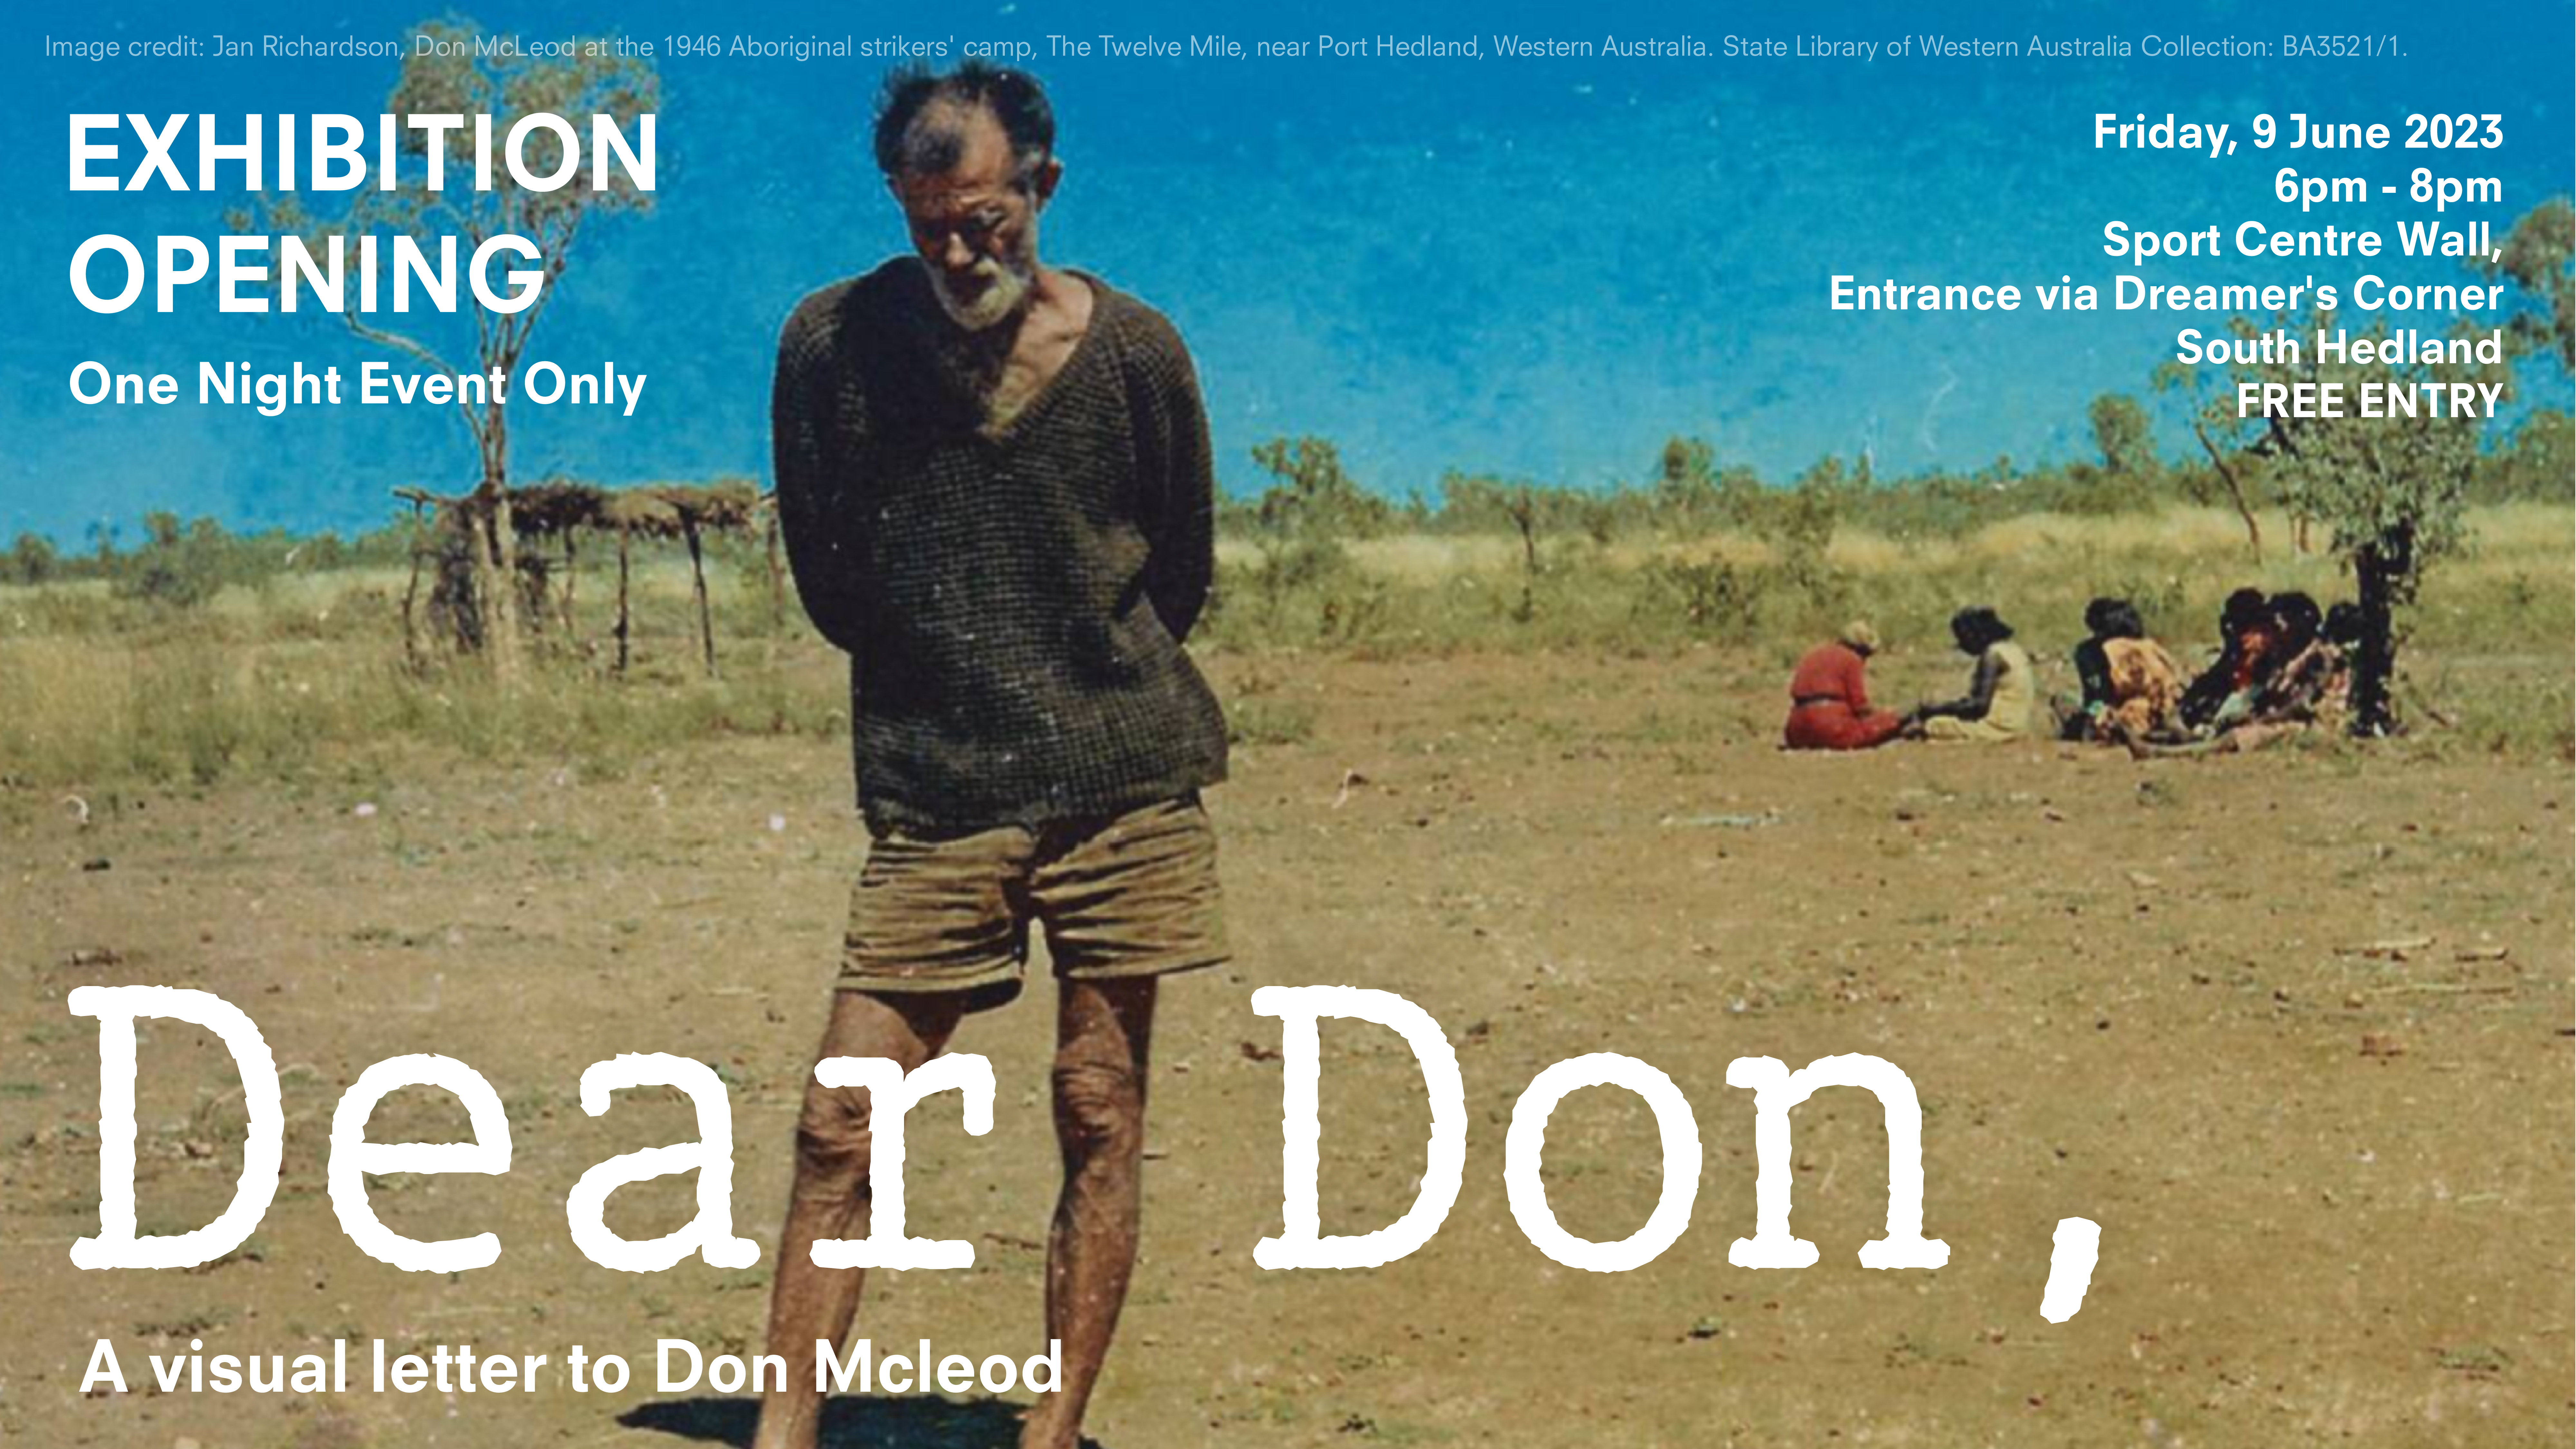 Dear Don, One Night Only Outdoor Exhibition